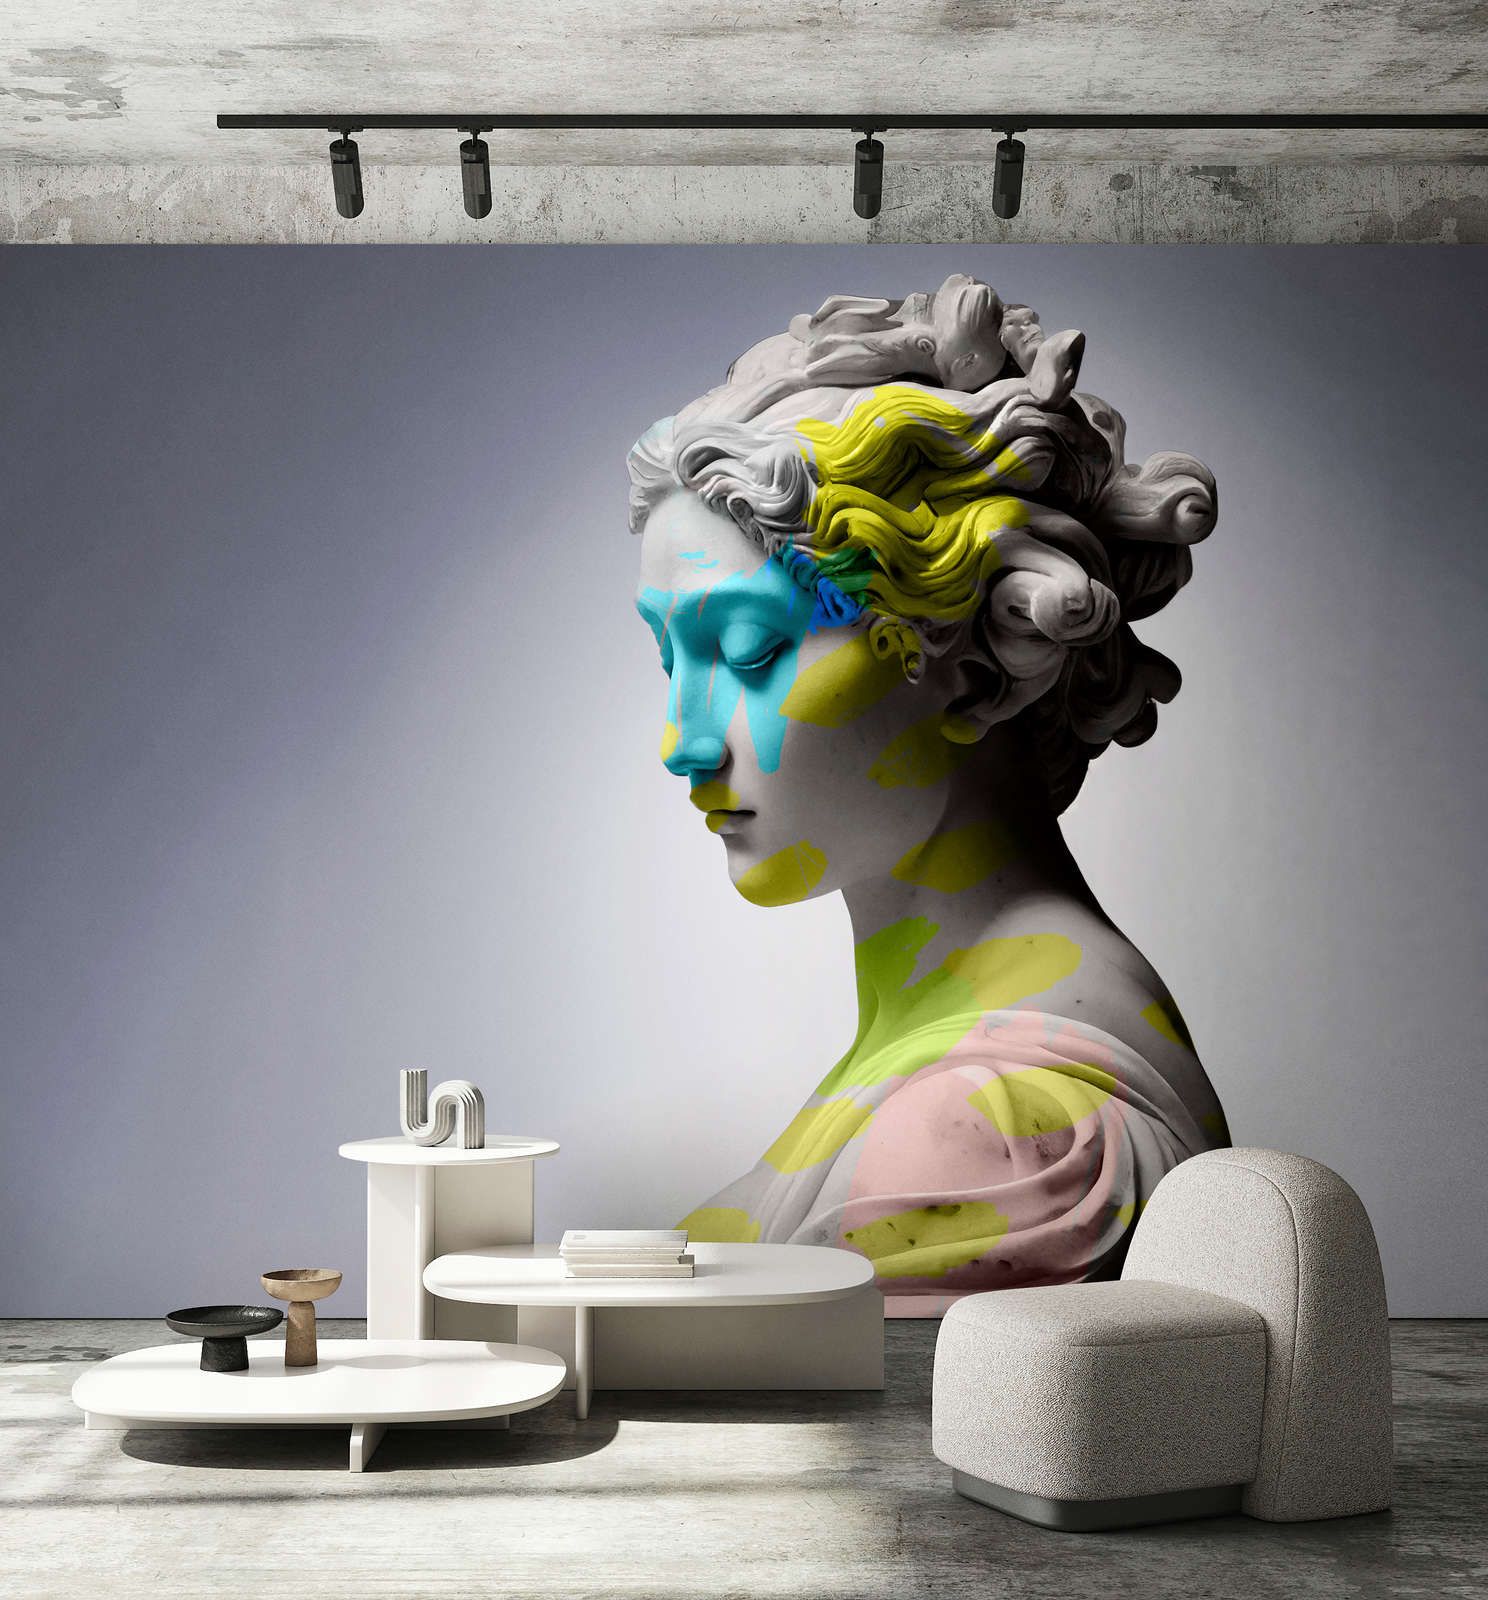             Photo wallpaper »clio« - female sculpture with colourful accents - Smooth, slightly shiny premium non-woven fabric
        